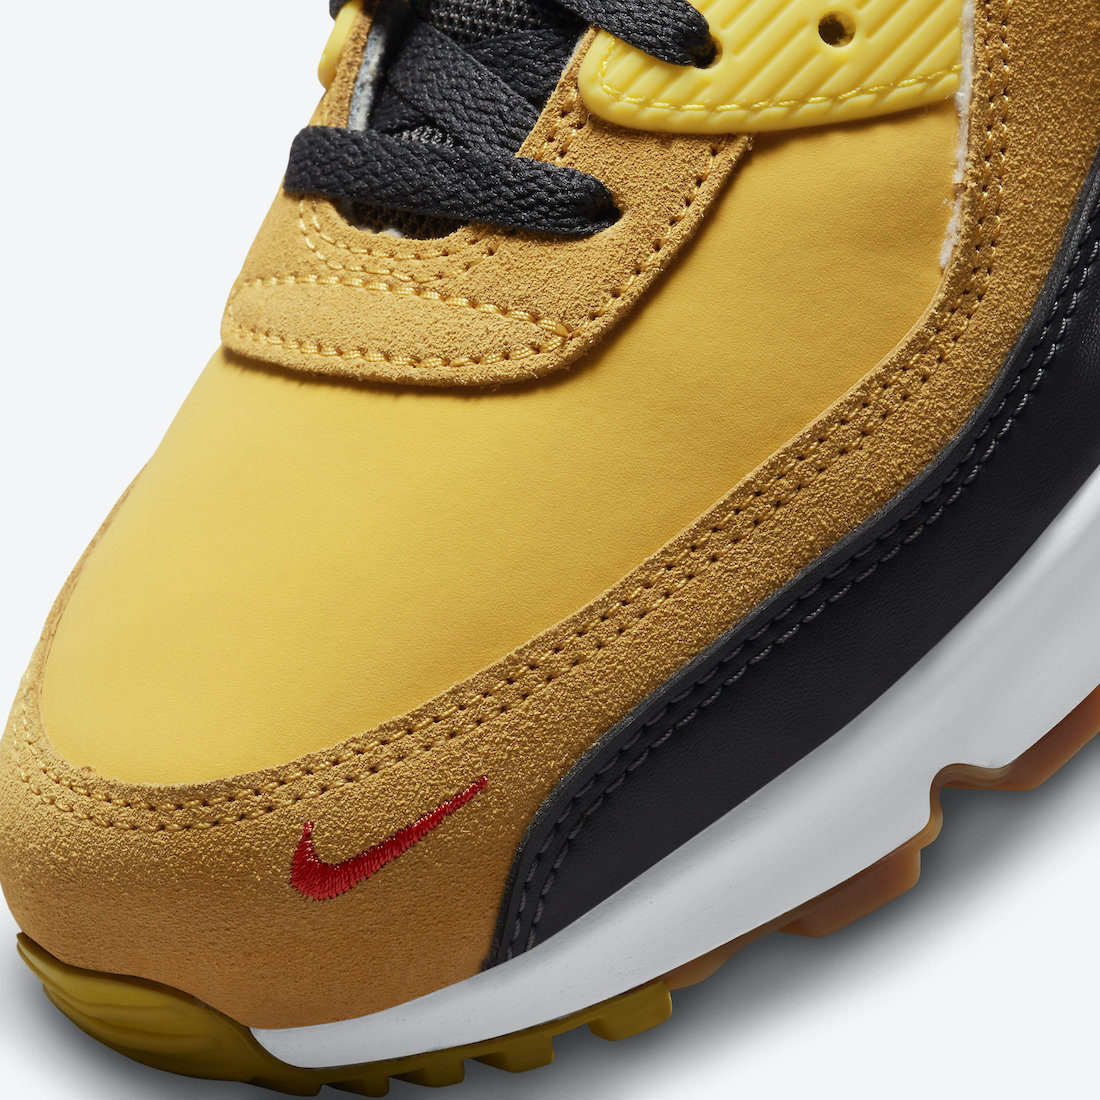 Nike-Air-Max-90-Go-The-Extra-Smile-DO5848-700-Release-Date-6